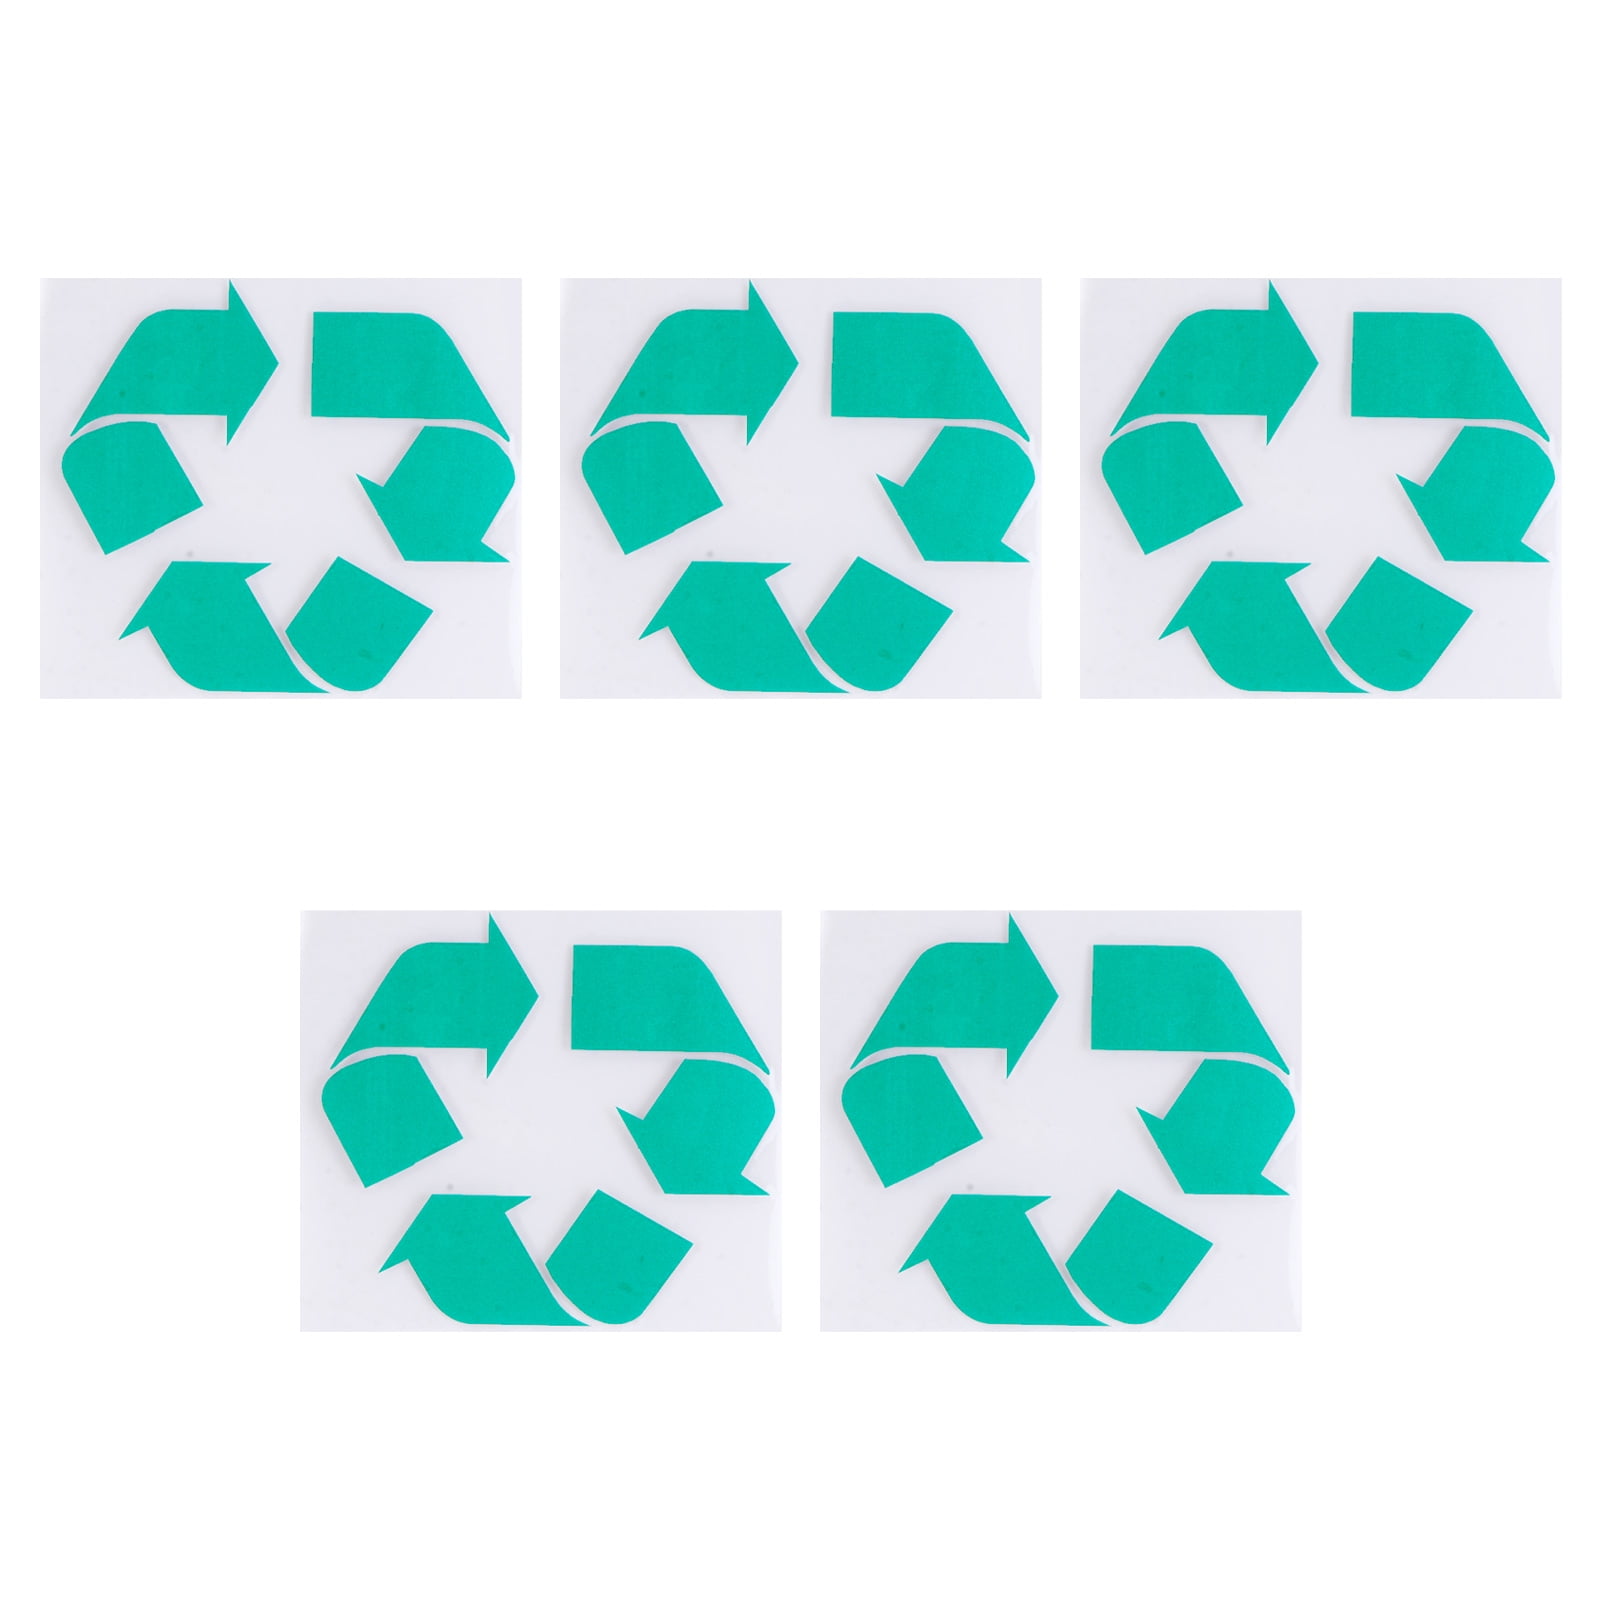 to Organize Trash cans or Garbage containers and Walls -Countour Cut Small White Sticker 5in x 5in 2 Pack Recycle Symbol Sticker Decal 